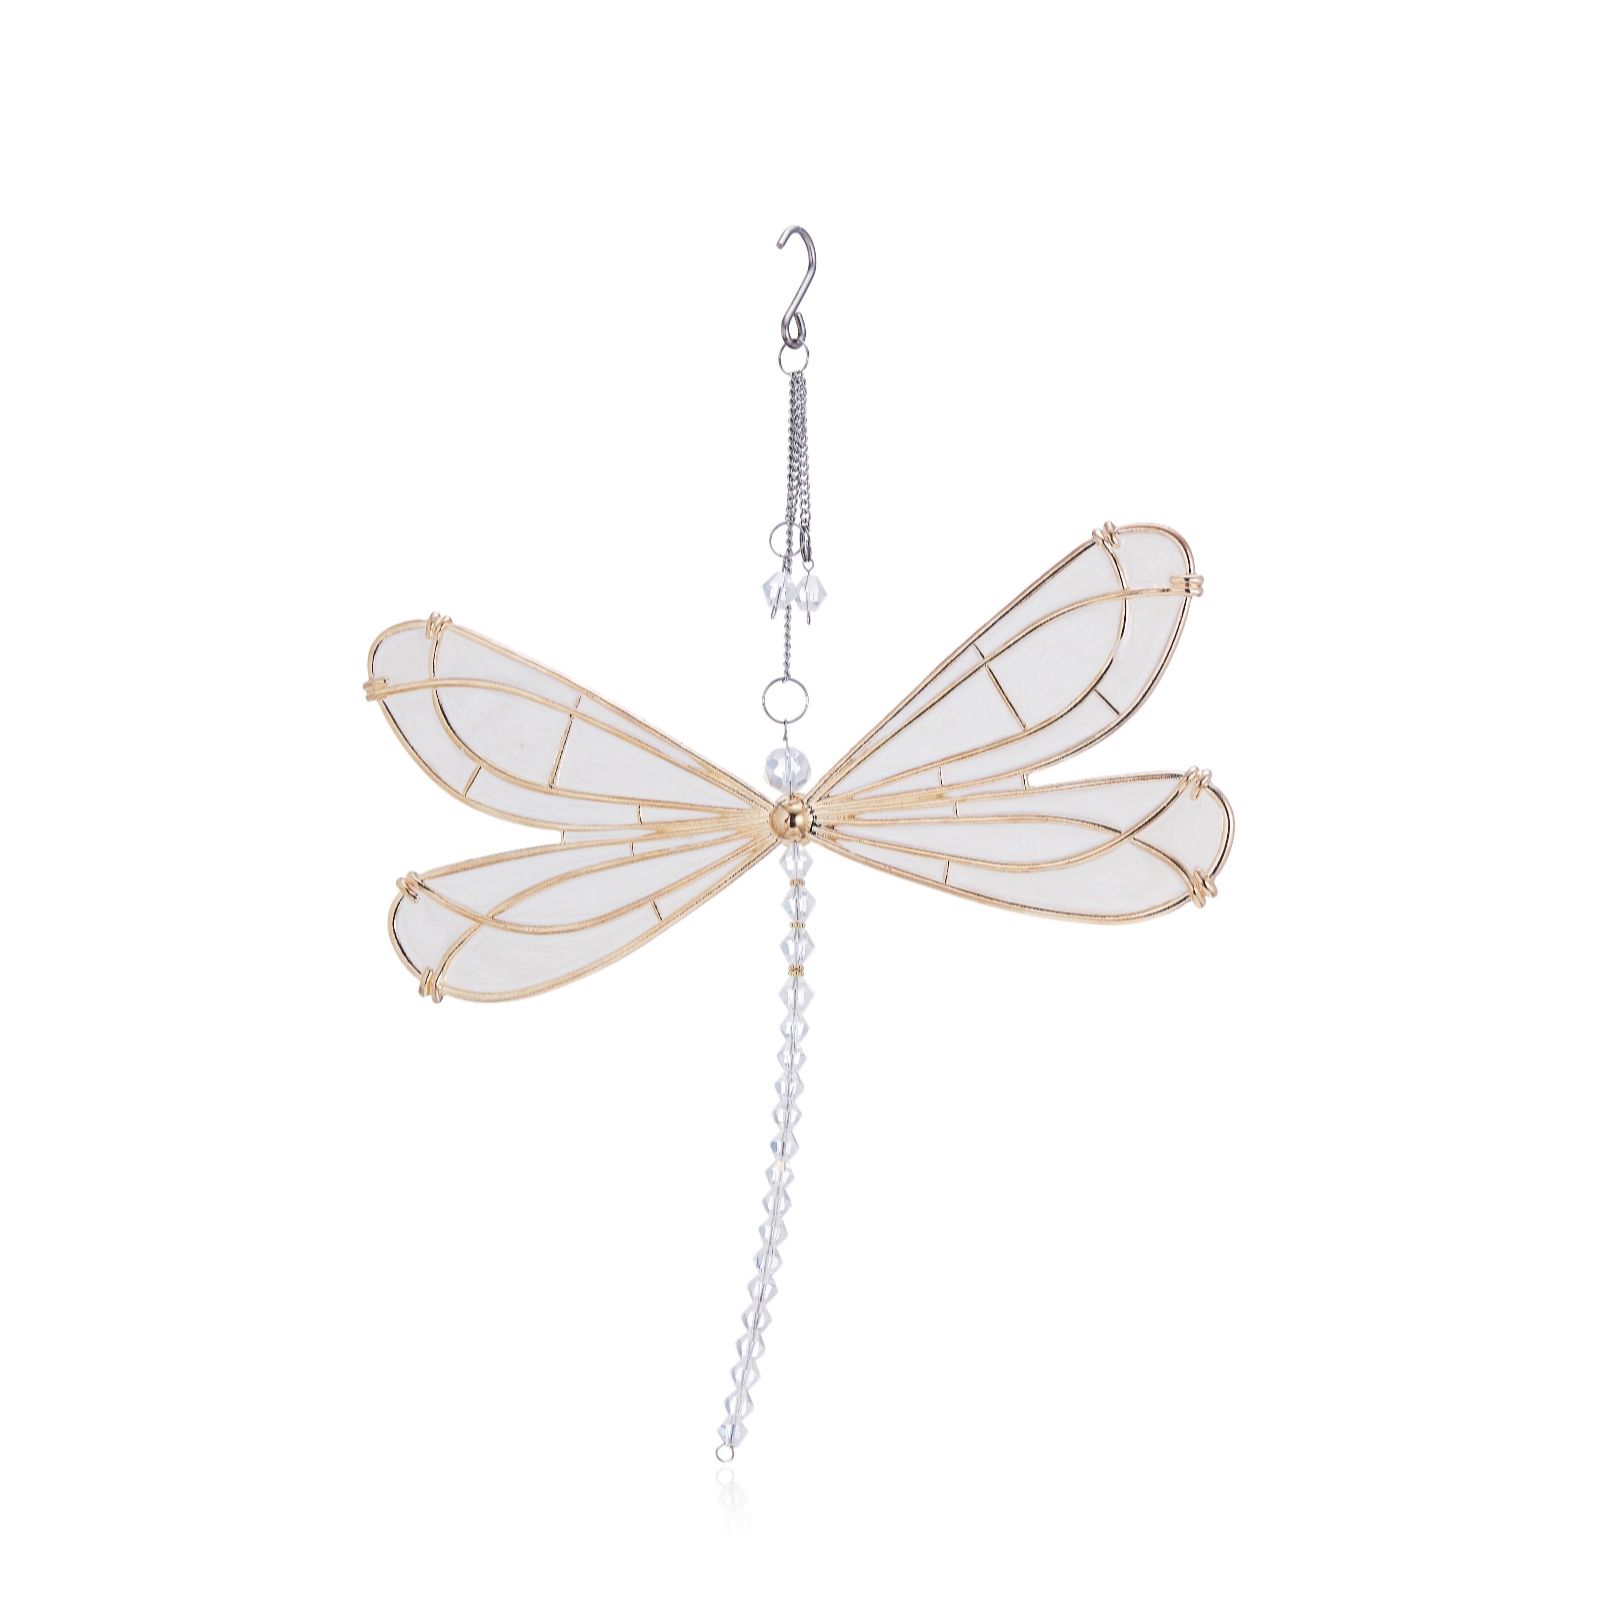 For Living Jewelled Butterfly or Dragonfly Outdoor Wall Art & Decor